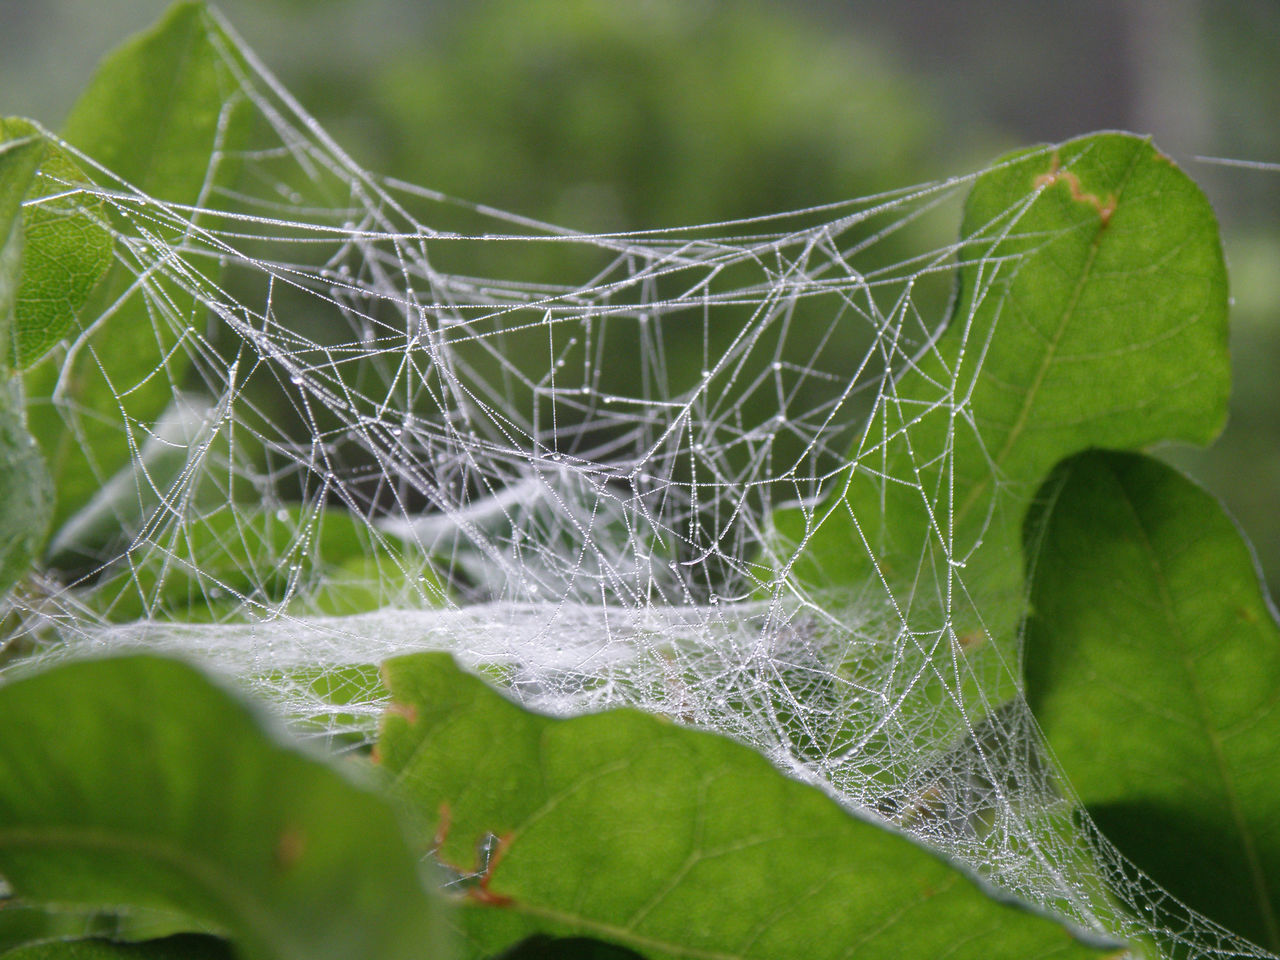 spider web, plant part, leaf, fragility, close-up, nature, animal, green, no people, macro photography, plant, focus on foreground, wet, drop, water, beauty in nature, animal themes, outdoors, spider, day, selective focus, environment, intricacy, insect, dew, animal wildlife, trapped, complexity, macro, pattern, arachnid